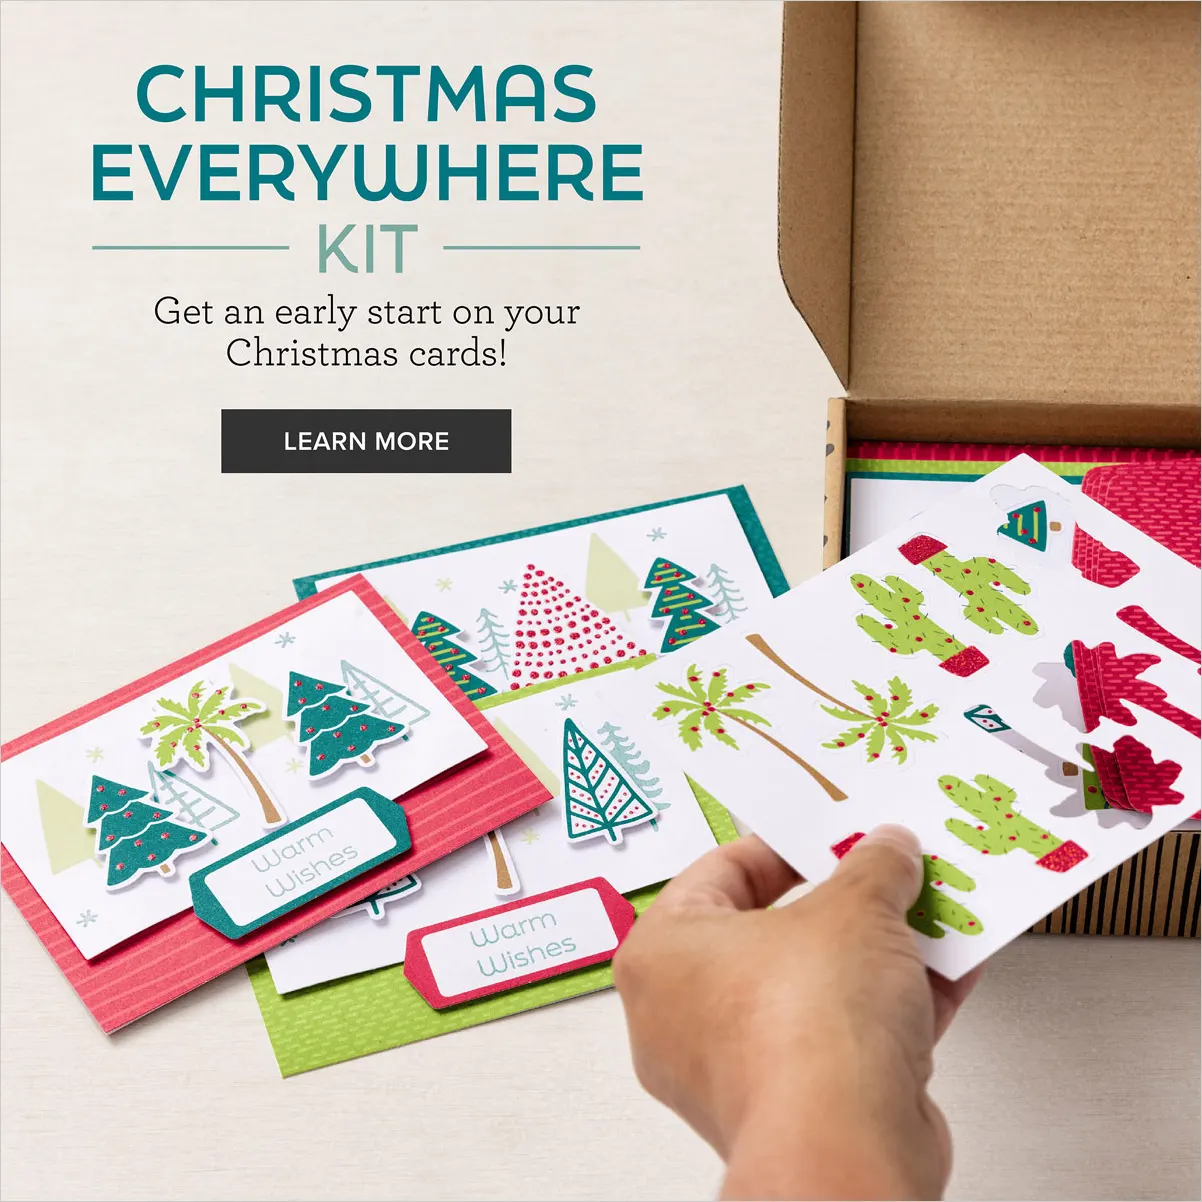 Stampin' Up! Festive Tags Kit Kits Collection